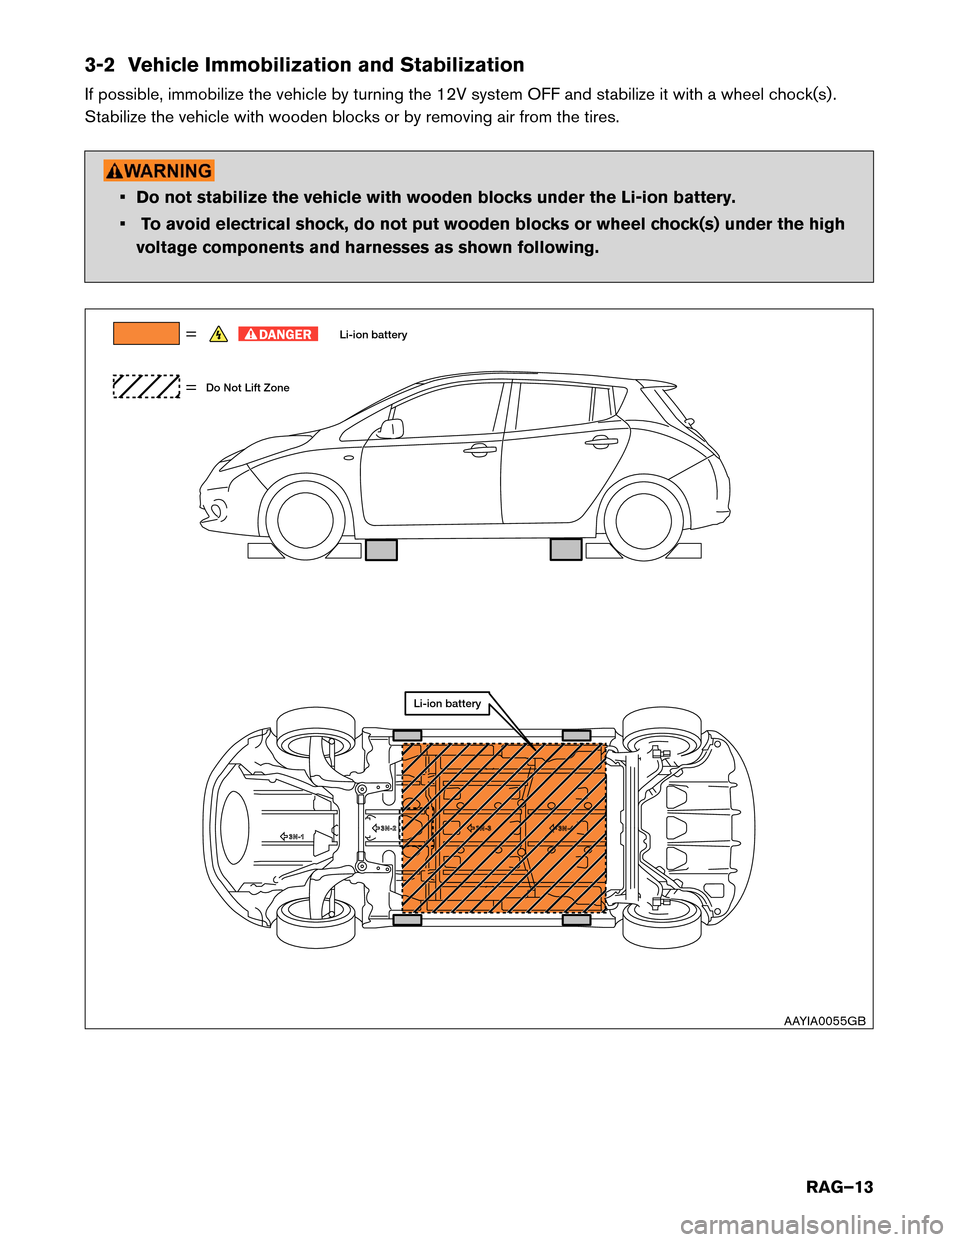 NISSAN LEAF 2015 1.G Roadside Assistance Guide 3-2 Vehicle Immobilization and Stabilization
If
possible, immobilize the vehicle by turning the 12V system OFF and stabilize it with a wheel chock(s) .
Stabilize the vehicle with wooden blocks or by r